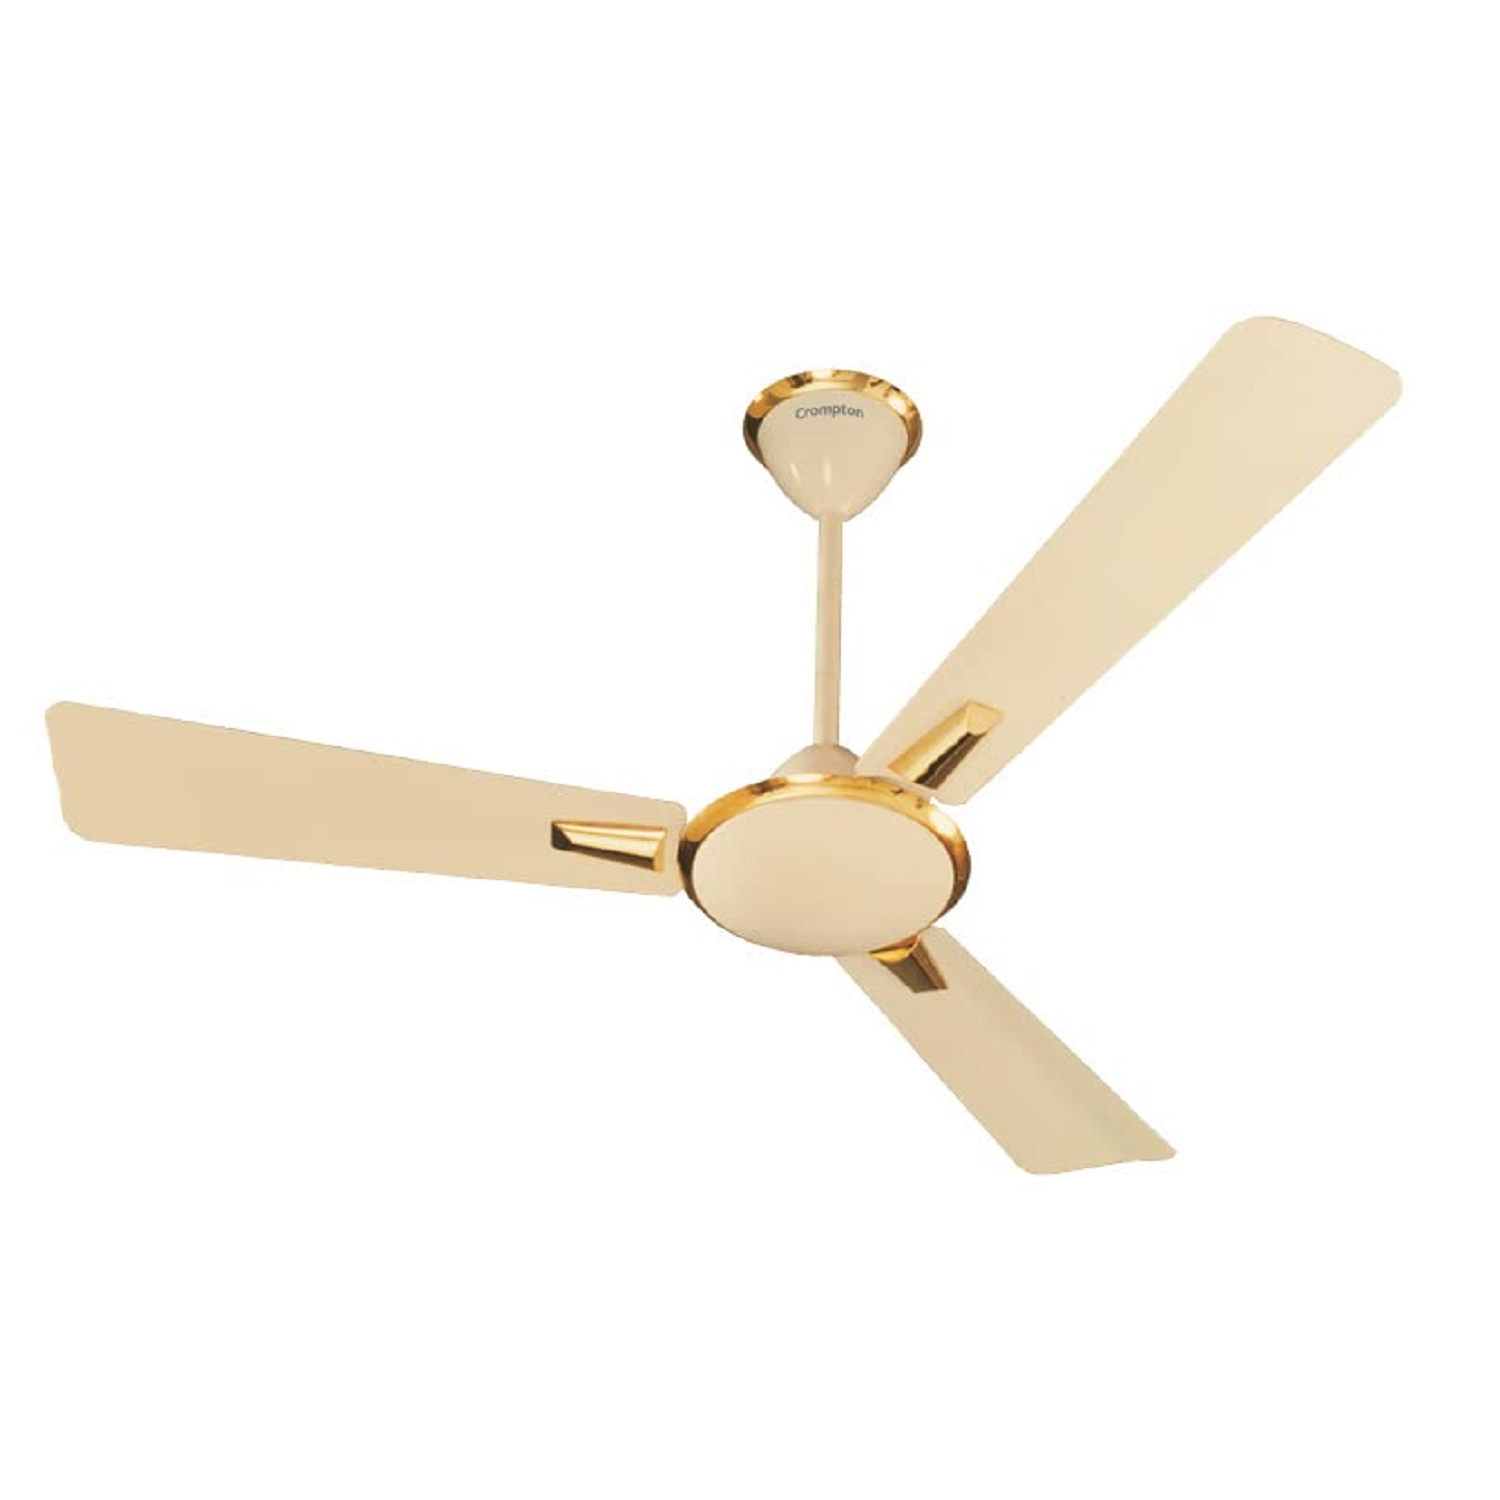 Crompton HIGHSPEED AURA 1200 mm (48 inch) Ceiling Fan (Ivory Deluxe) Star rated energy efficient fan